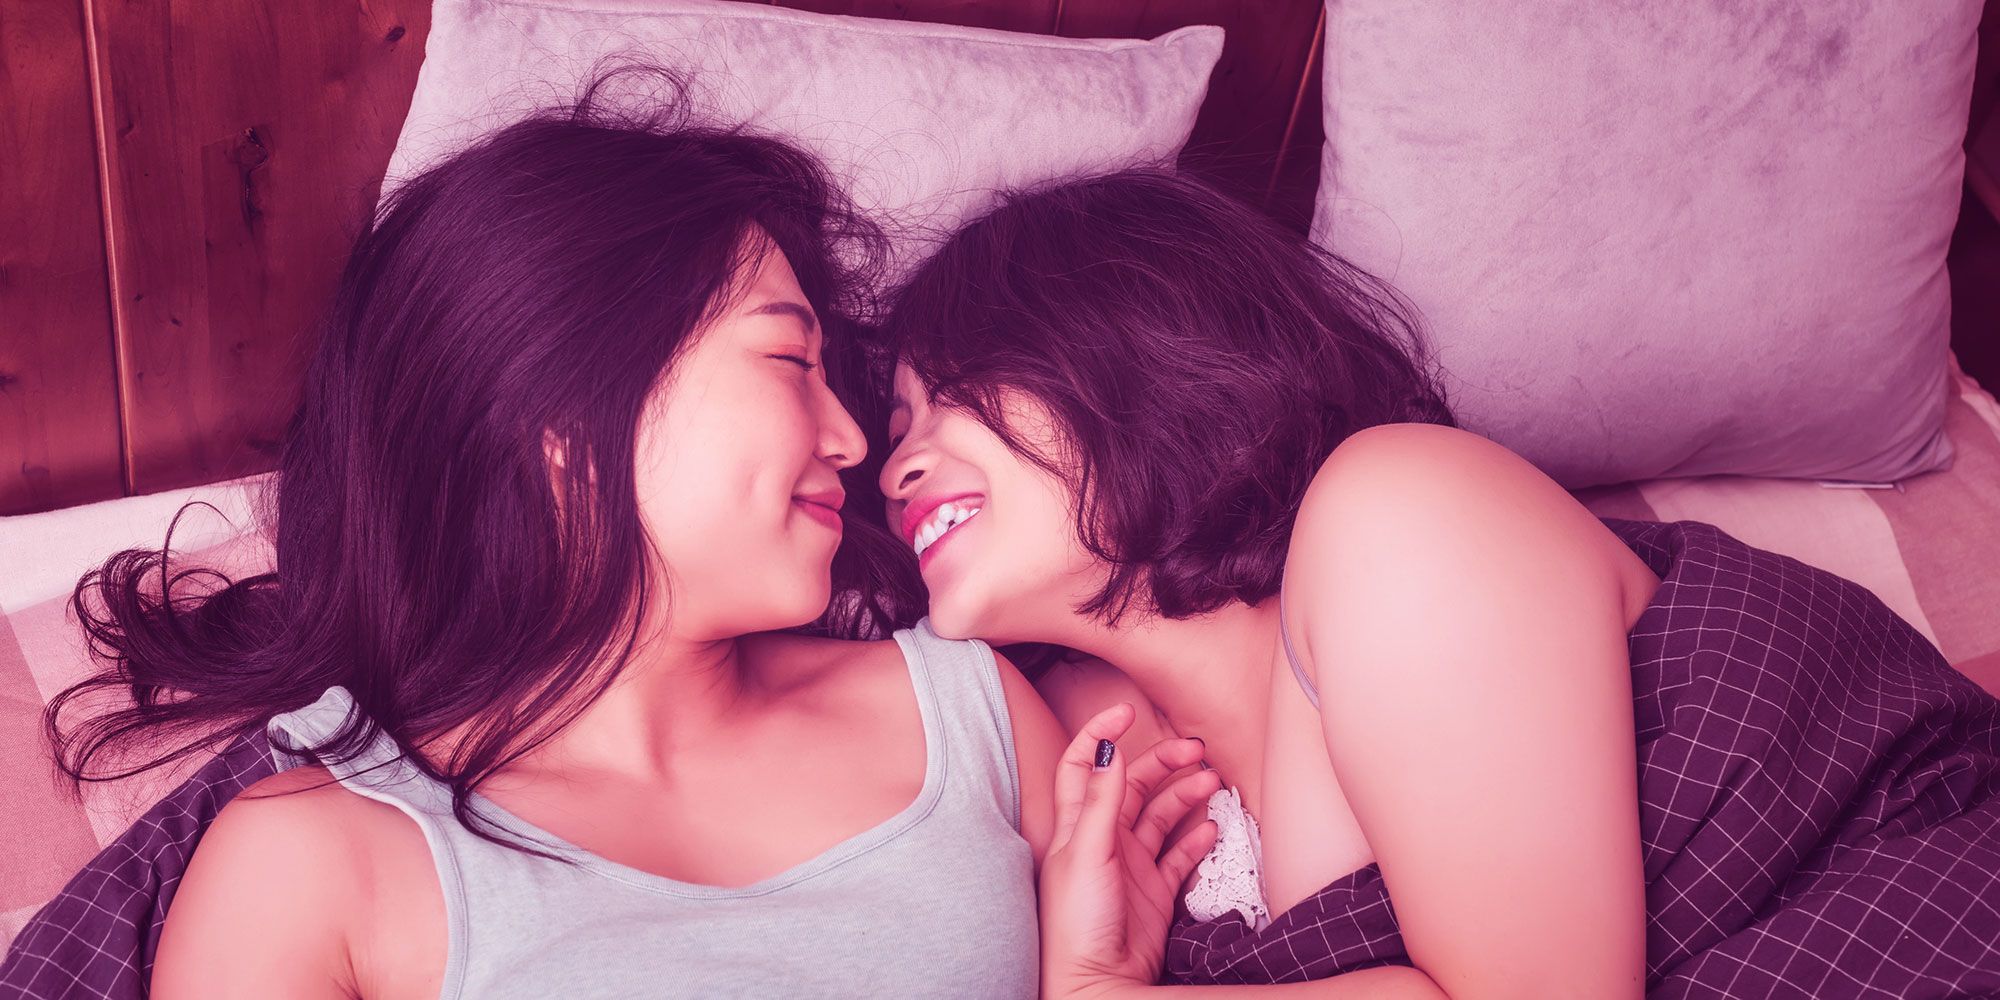 14 queer women on what they find most attractive in a partner photo